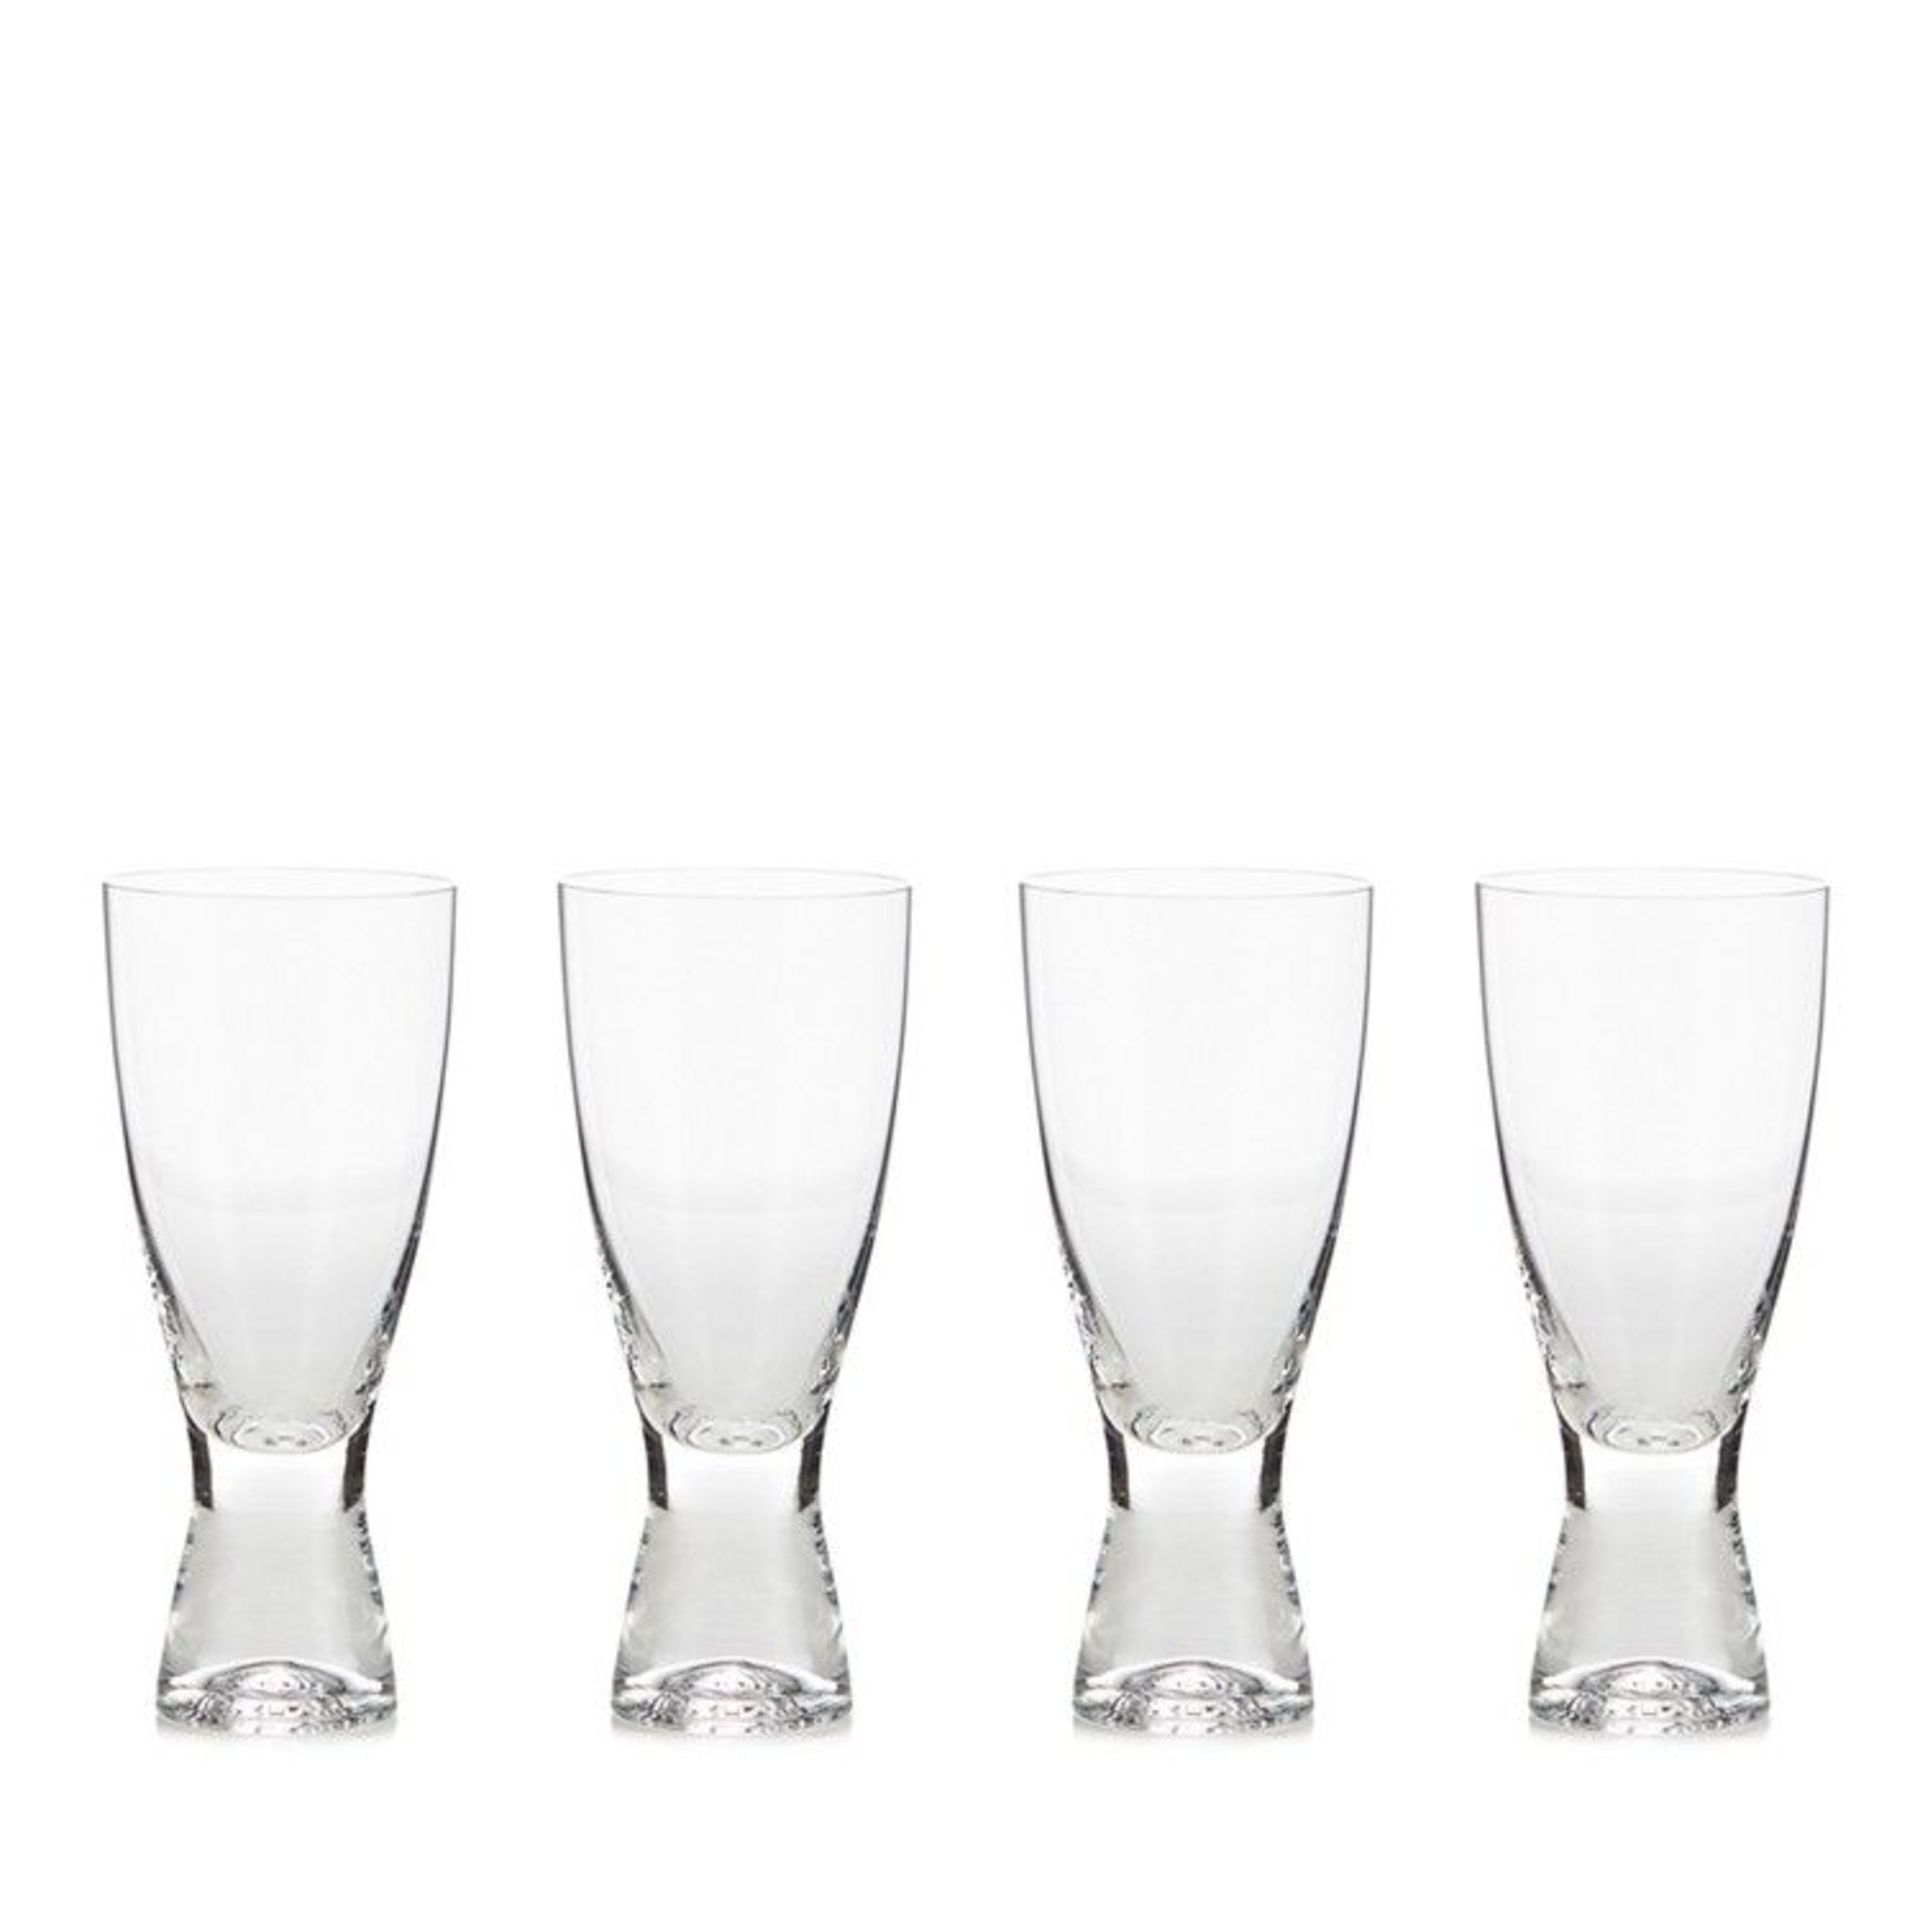 BRAND NEW 4 PACK 'OSLO' TALL GLASSES - RRP £20.